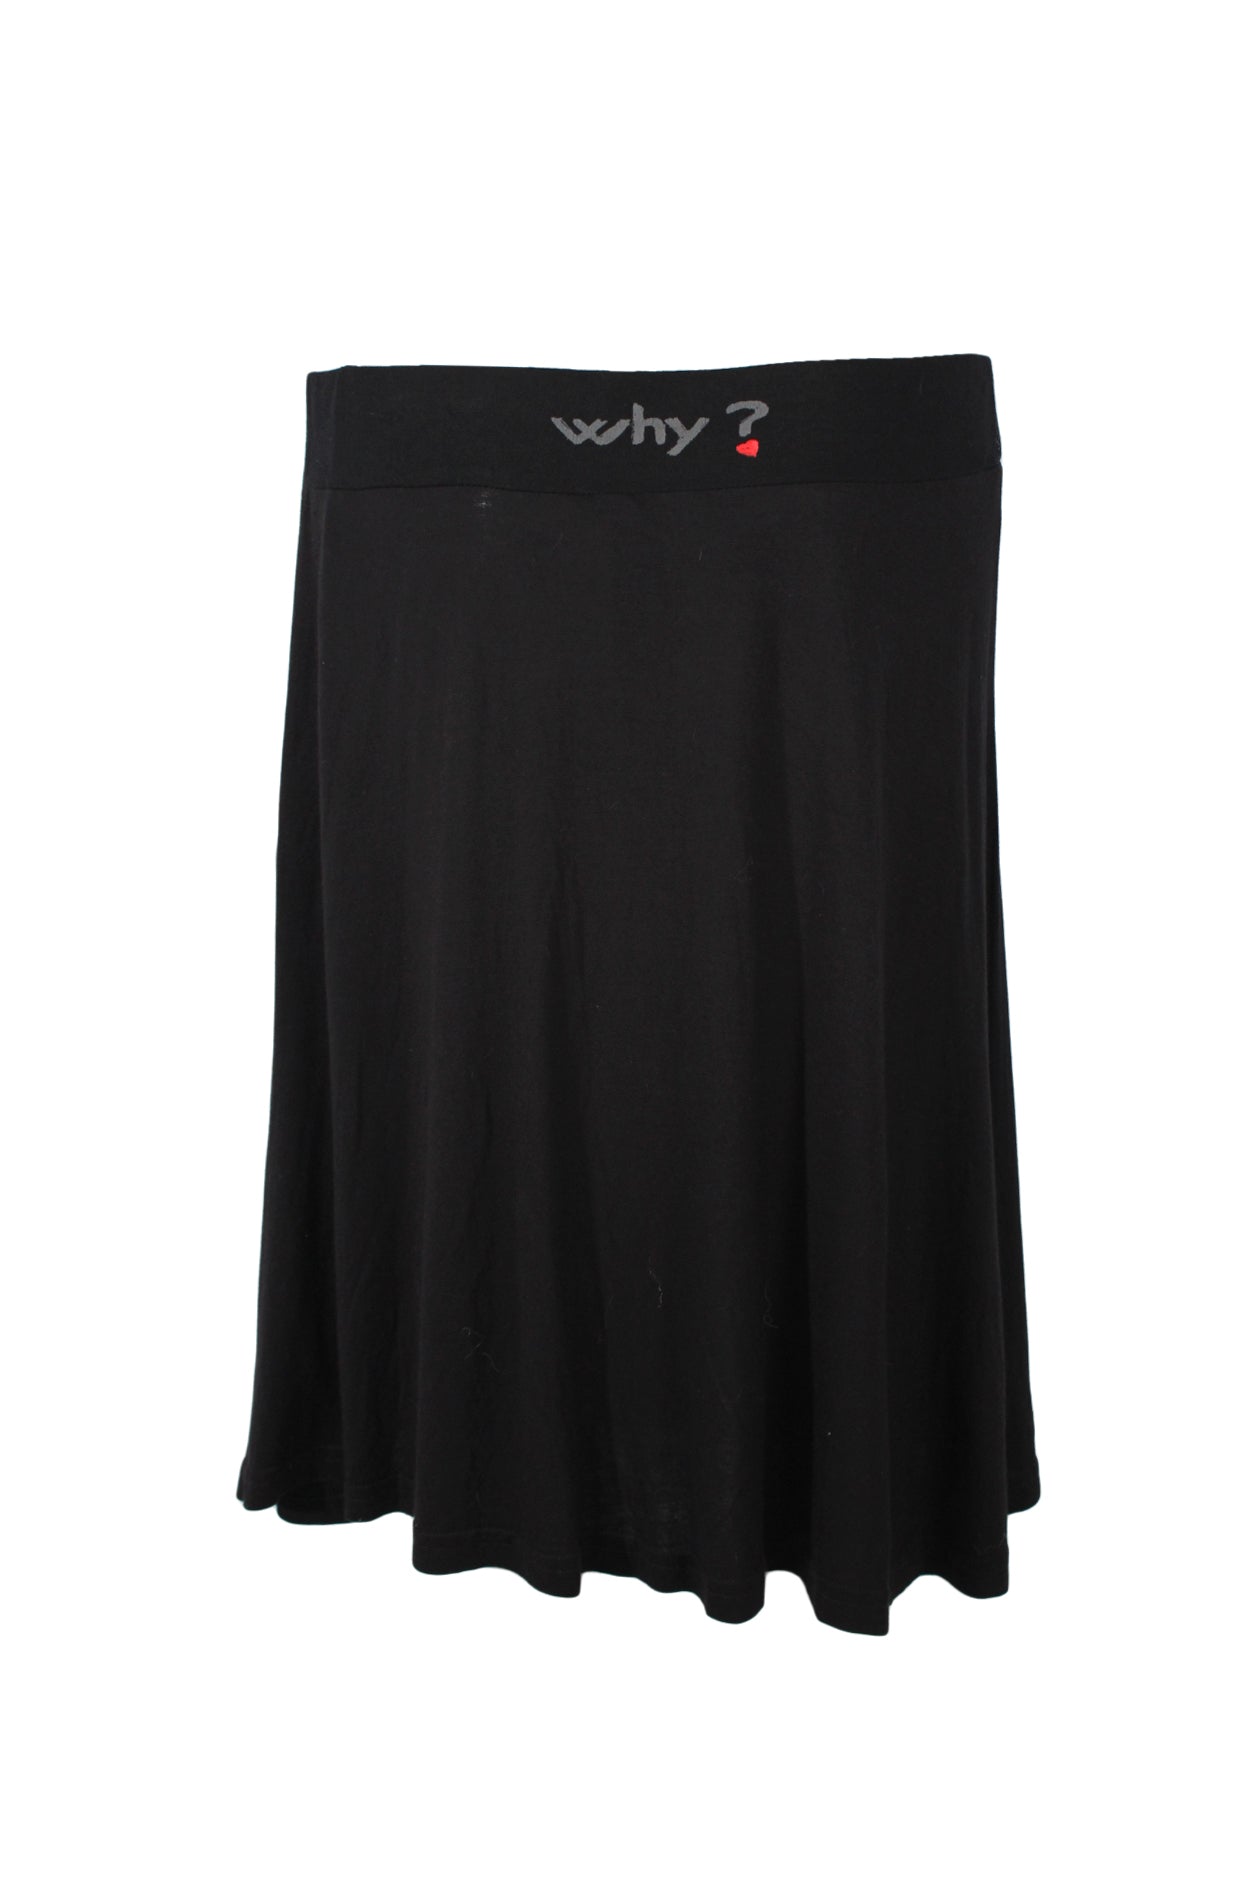 back angle vintage y2k knit skirt featuring gray 'why?' text and red heart at back waistband.